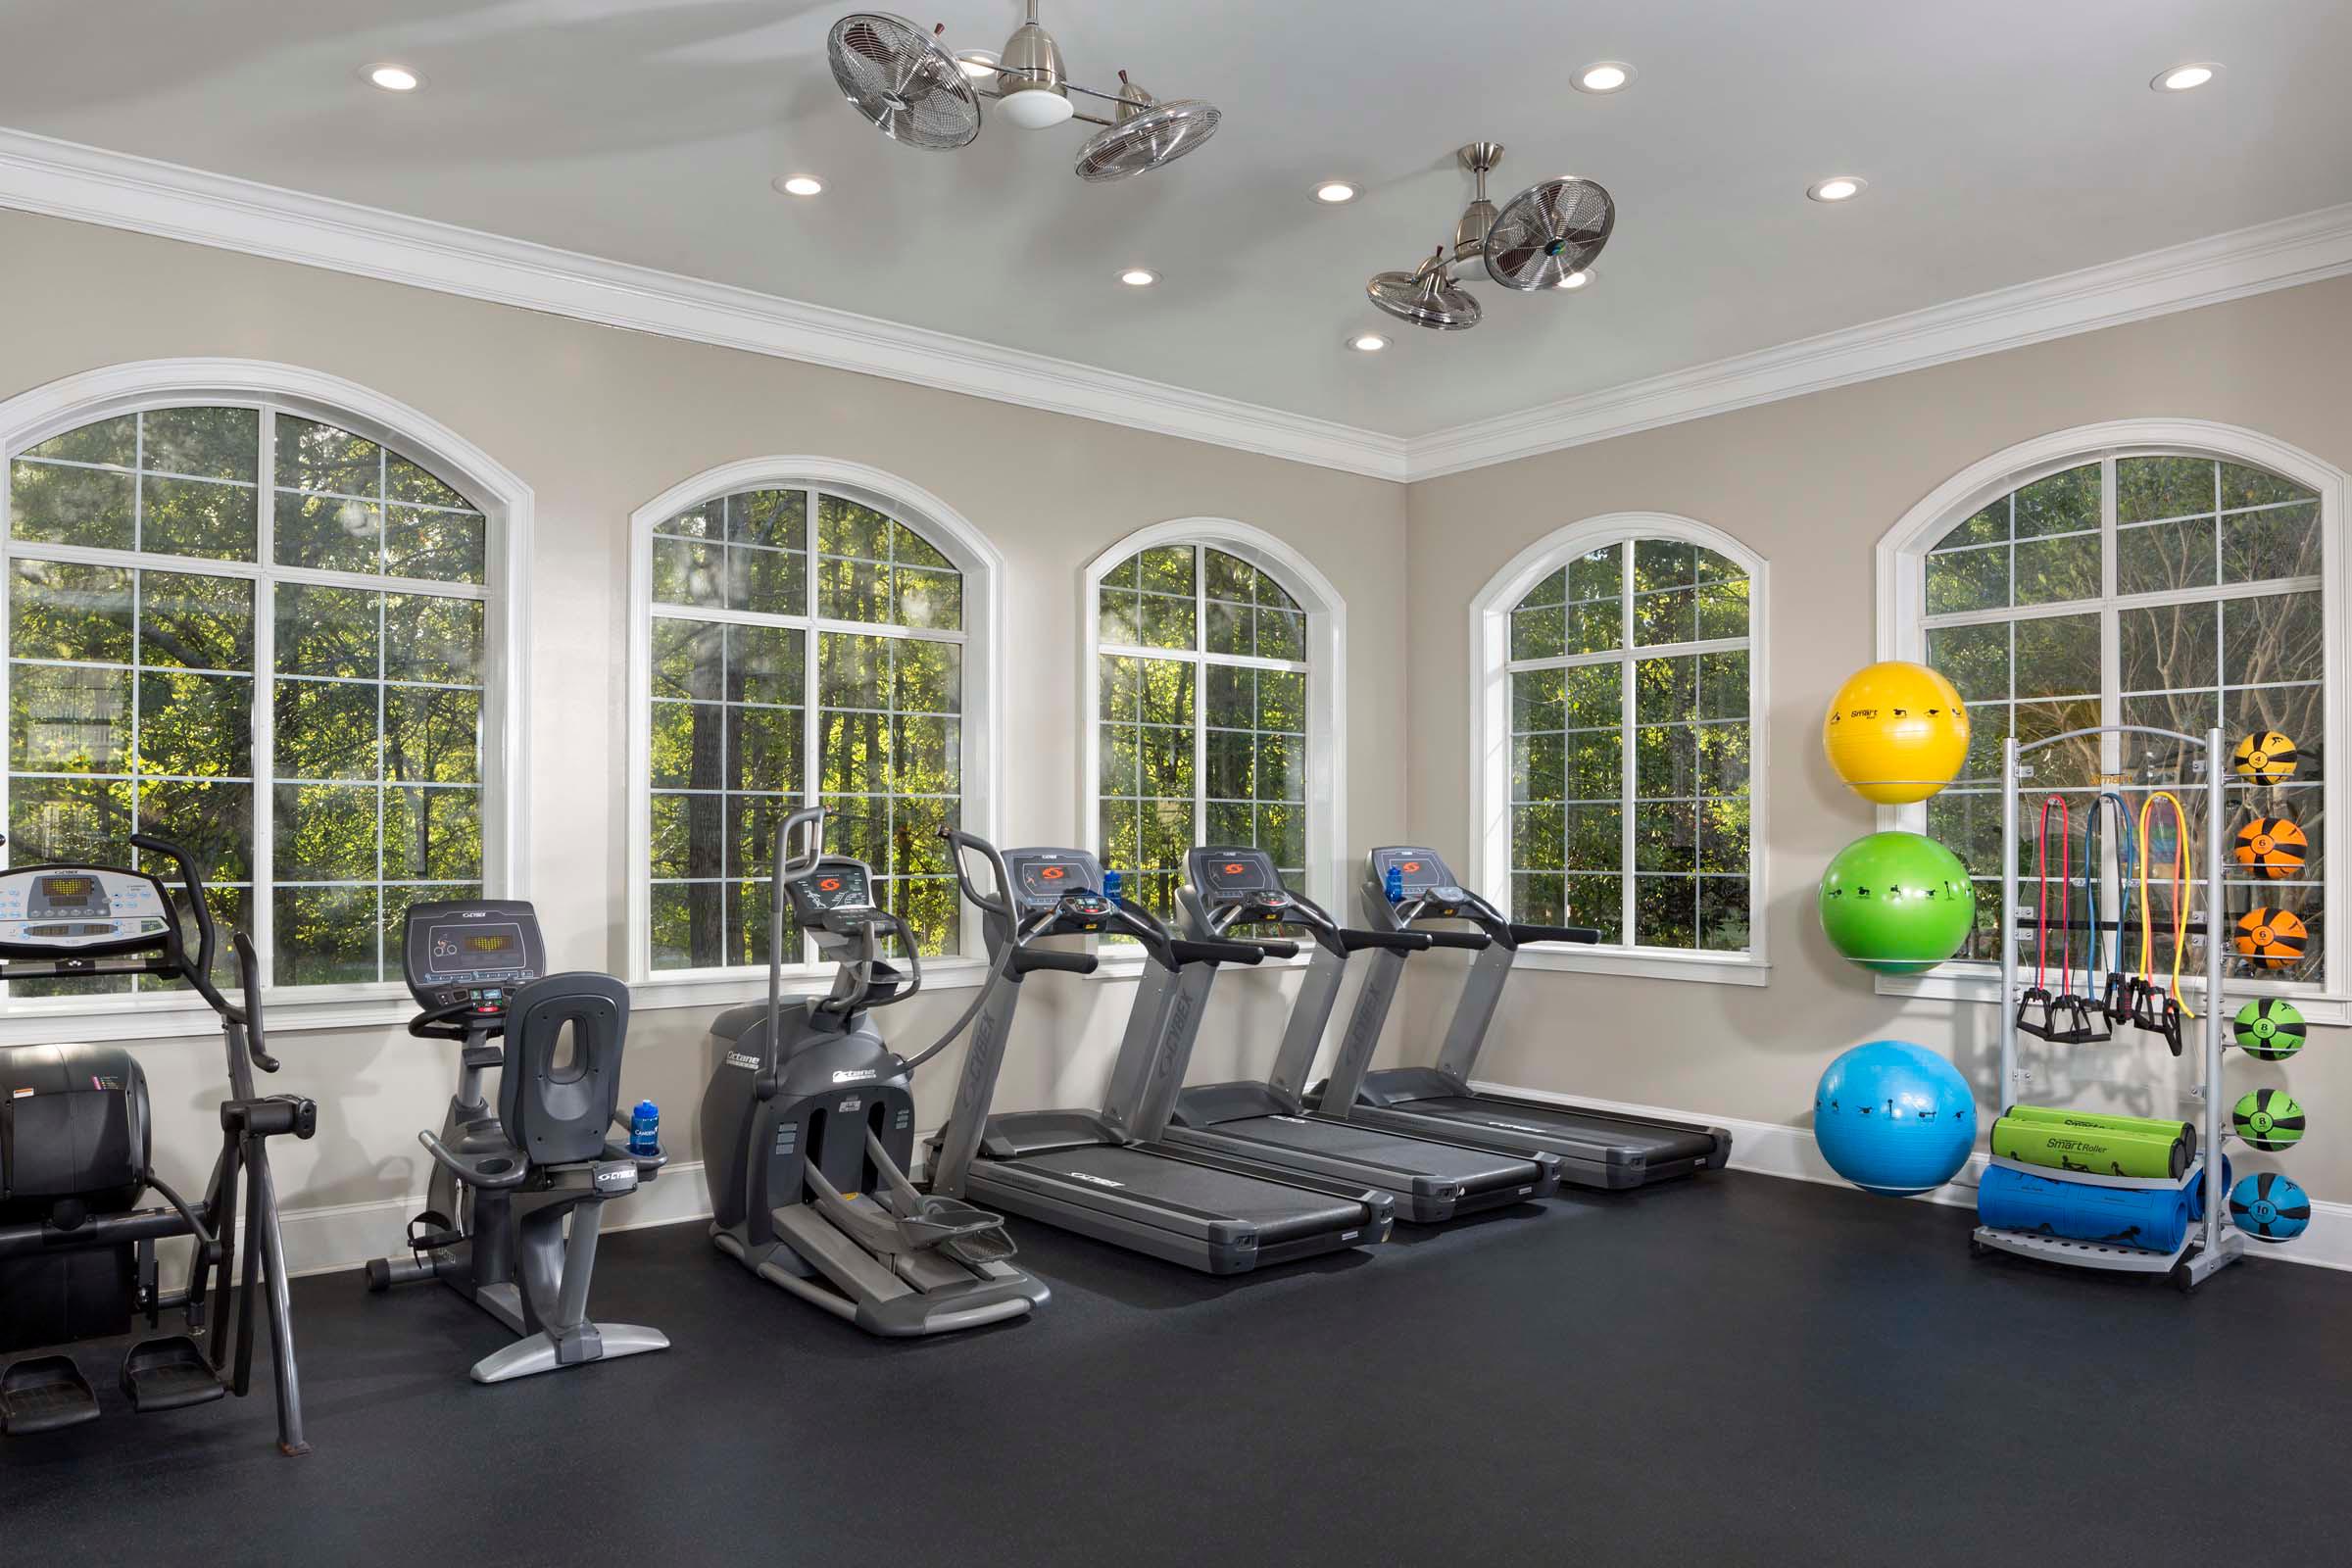 Fitness center with cardio equipment